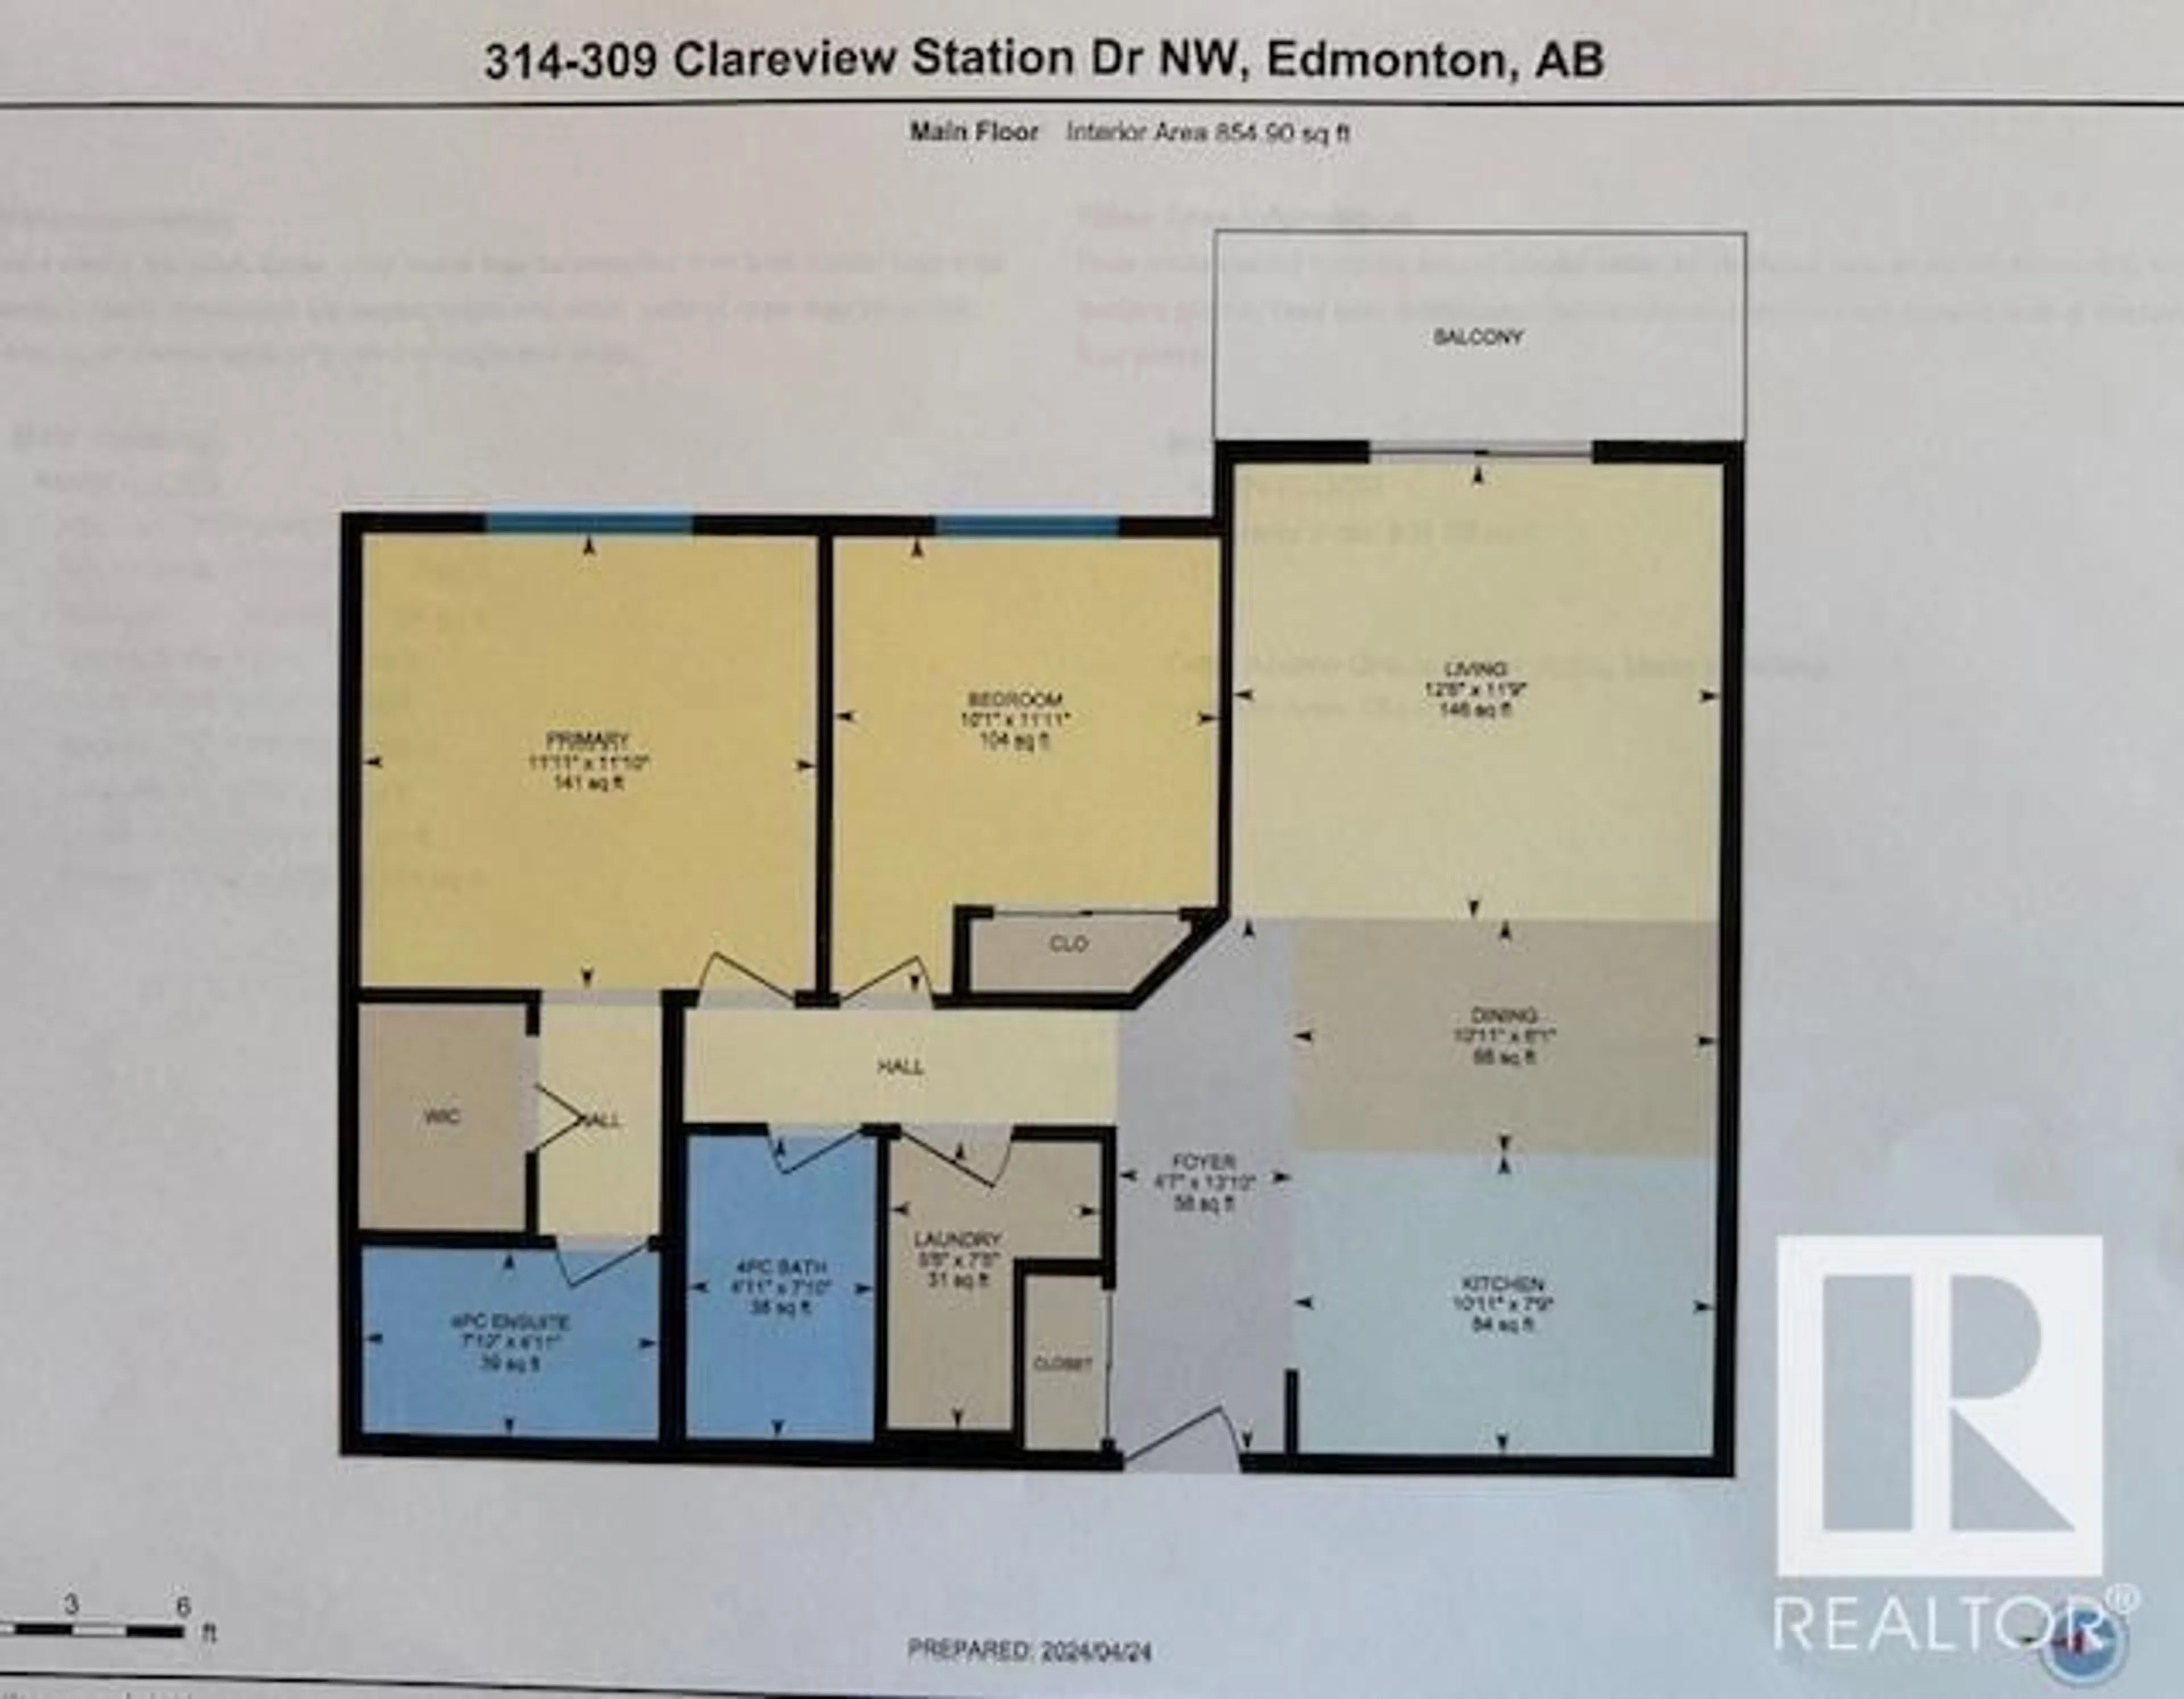 Floor plan for #314 309 Clareview Station DR NW, Edmonton Alberta T5Y0C5